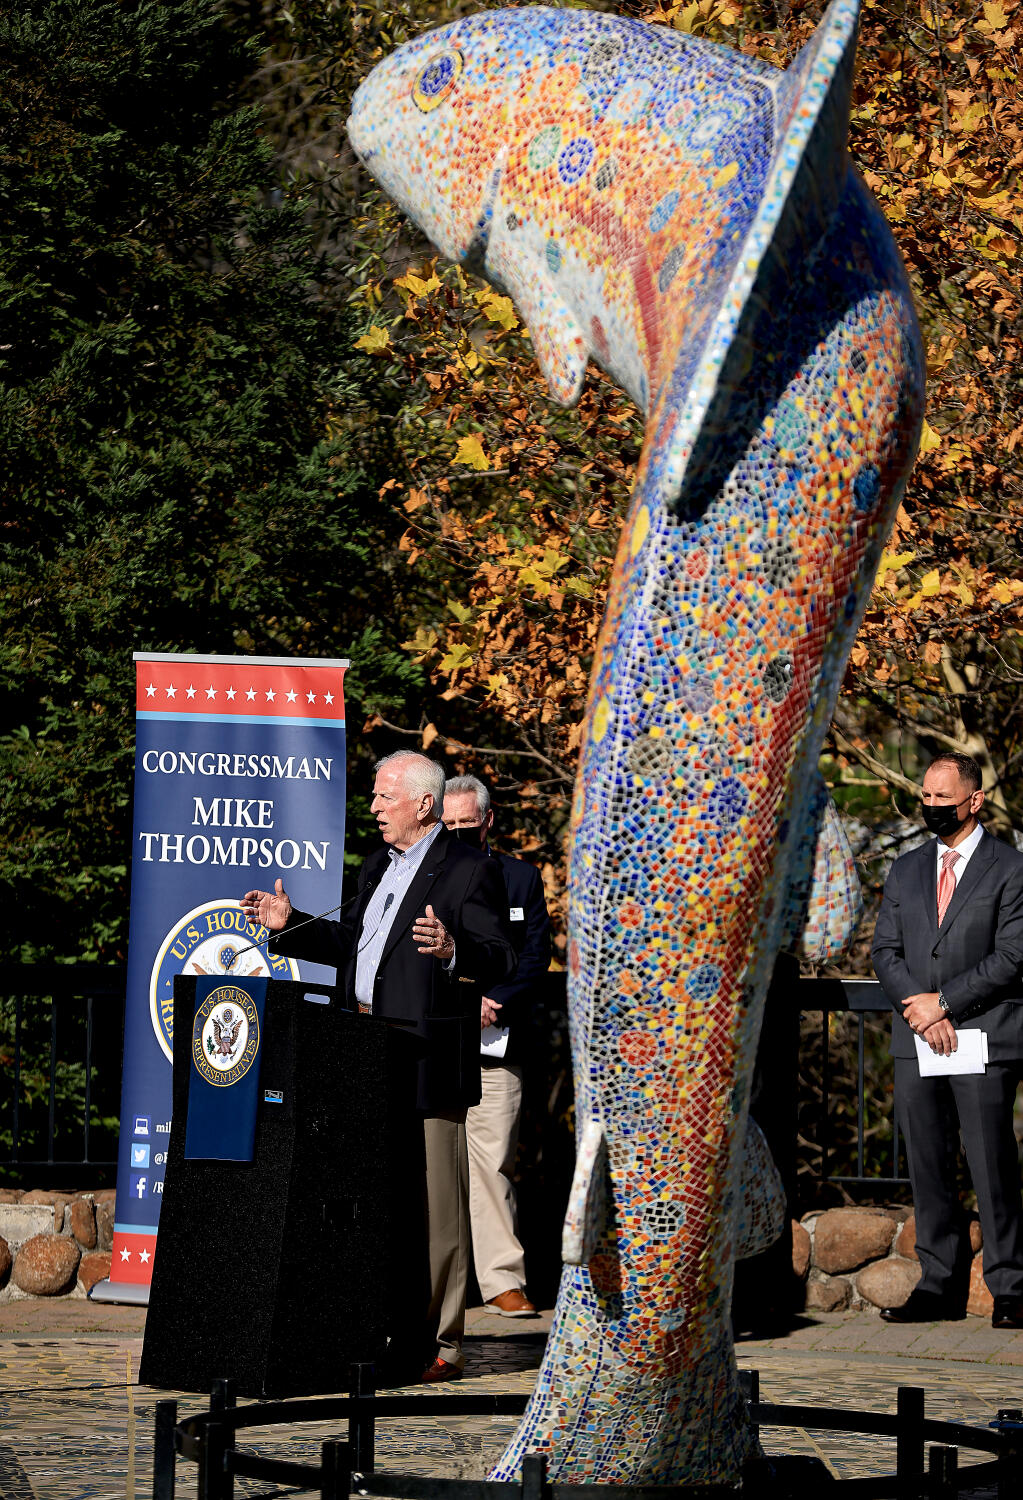 Congressman Mike Thompson speaks about the Infrastructure Investments and Jobs Act at the entrance to the Prince Memorial Greenway in Santa Rosa, Tuesday, Nov. 23, 2021. Thompson represents California's 5th Congressional District. (Kent Porter / The Press Democrat) 2021